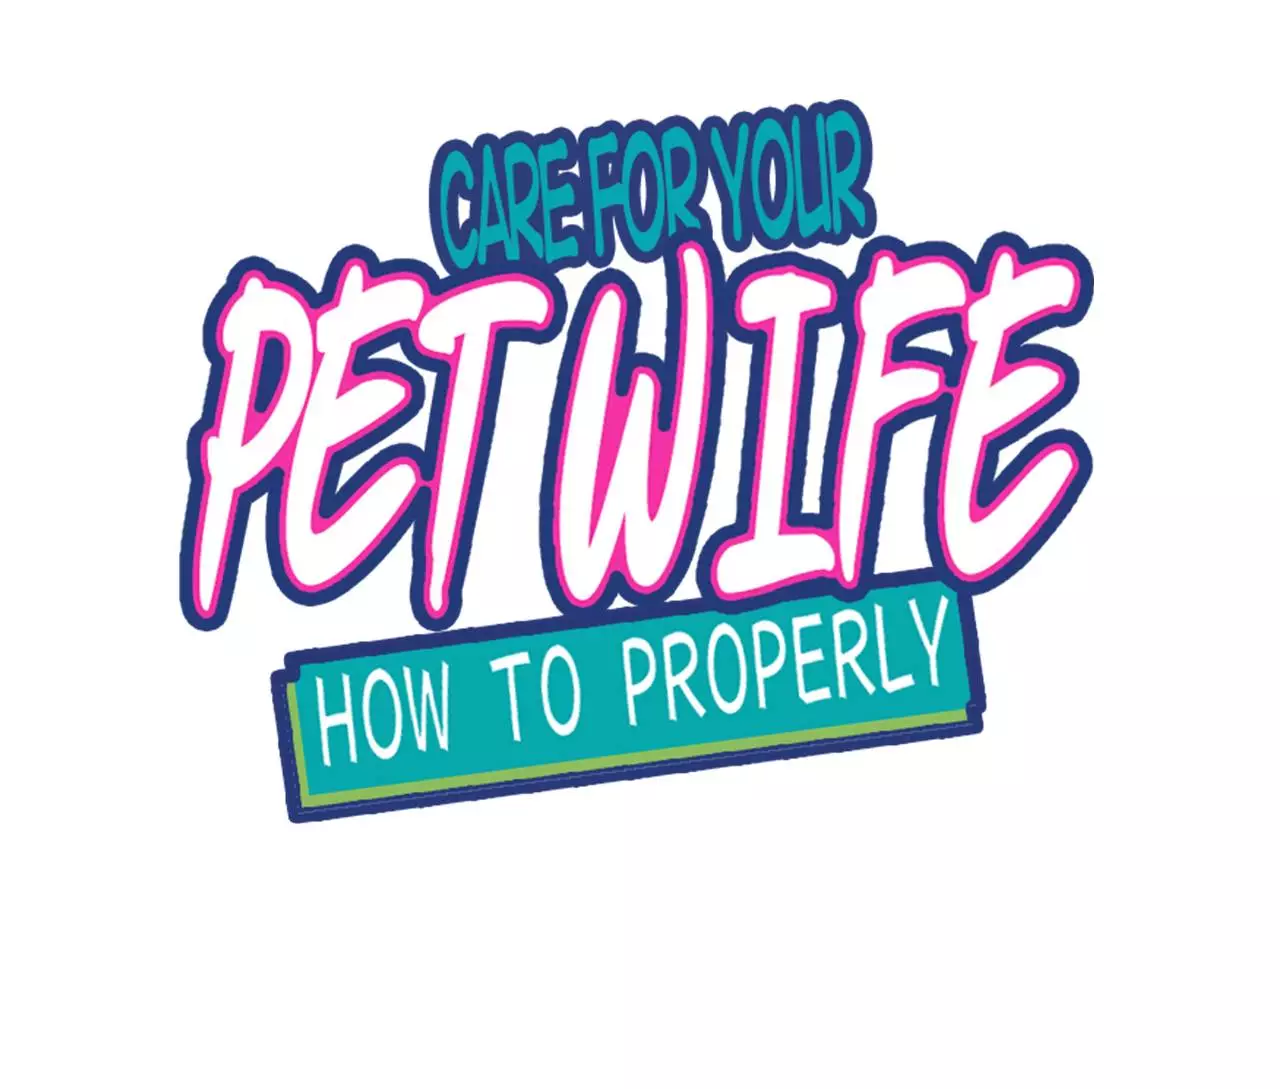 How To Properly Care For Your Pet Wife - 20 page 1-00d2608a